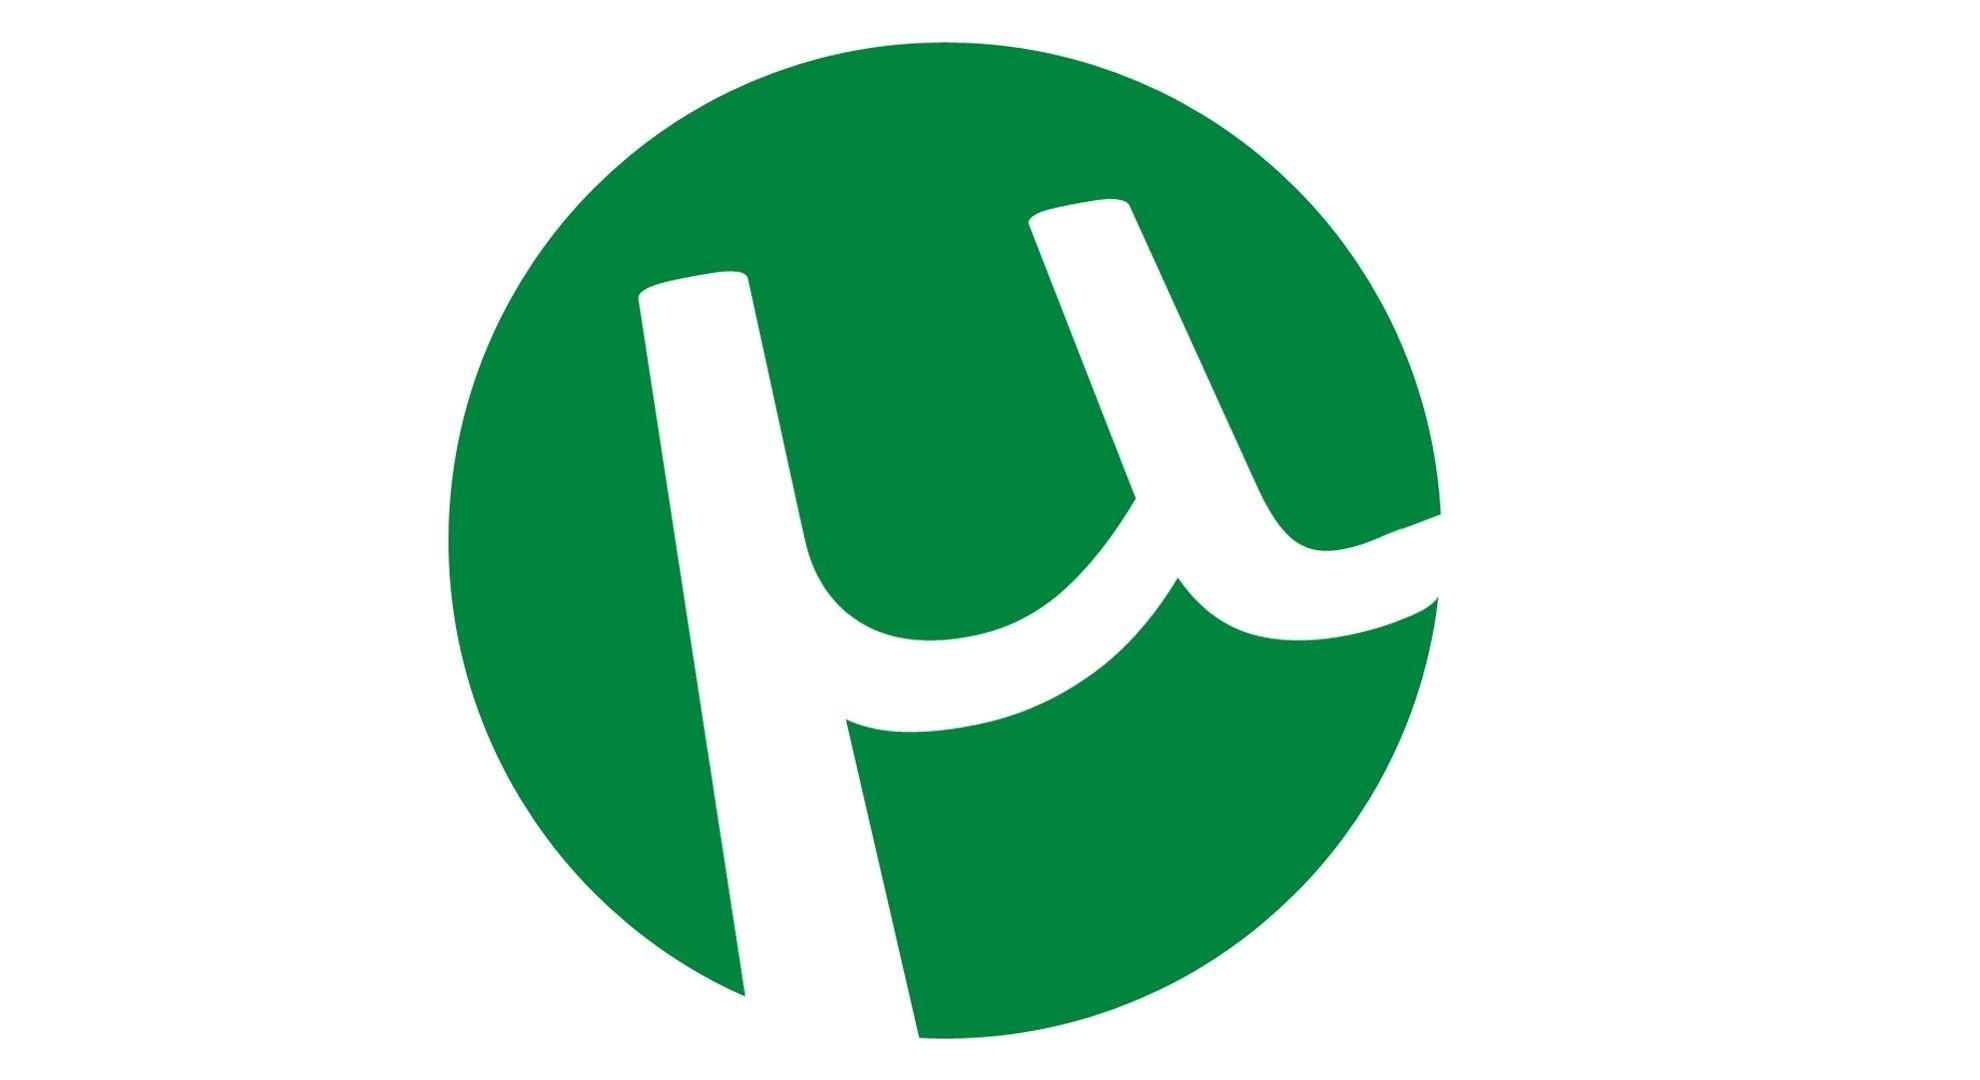 Utorrent Logo - Download a uTorrent Version That Chrome Doesn't Flag as Malicious